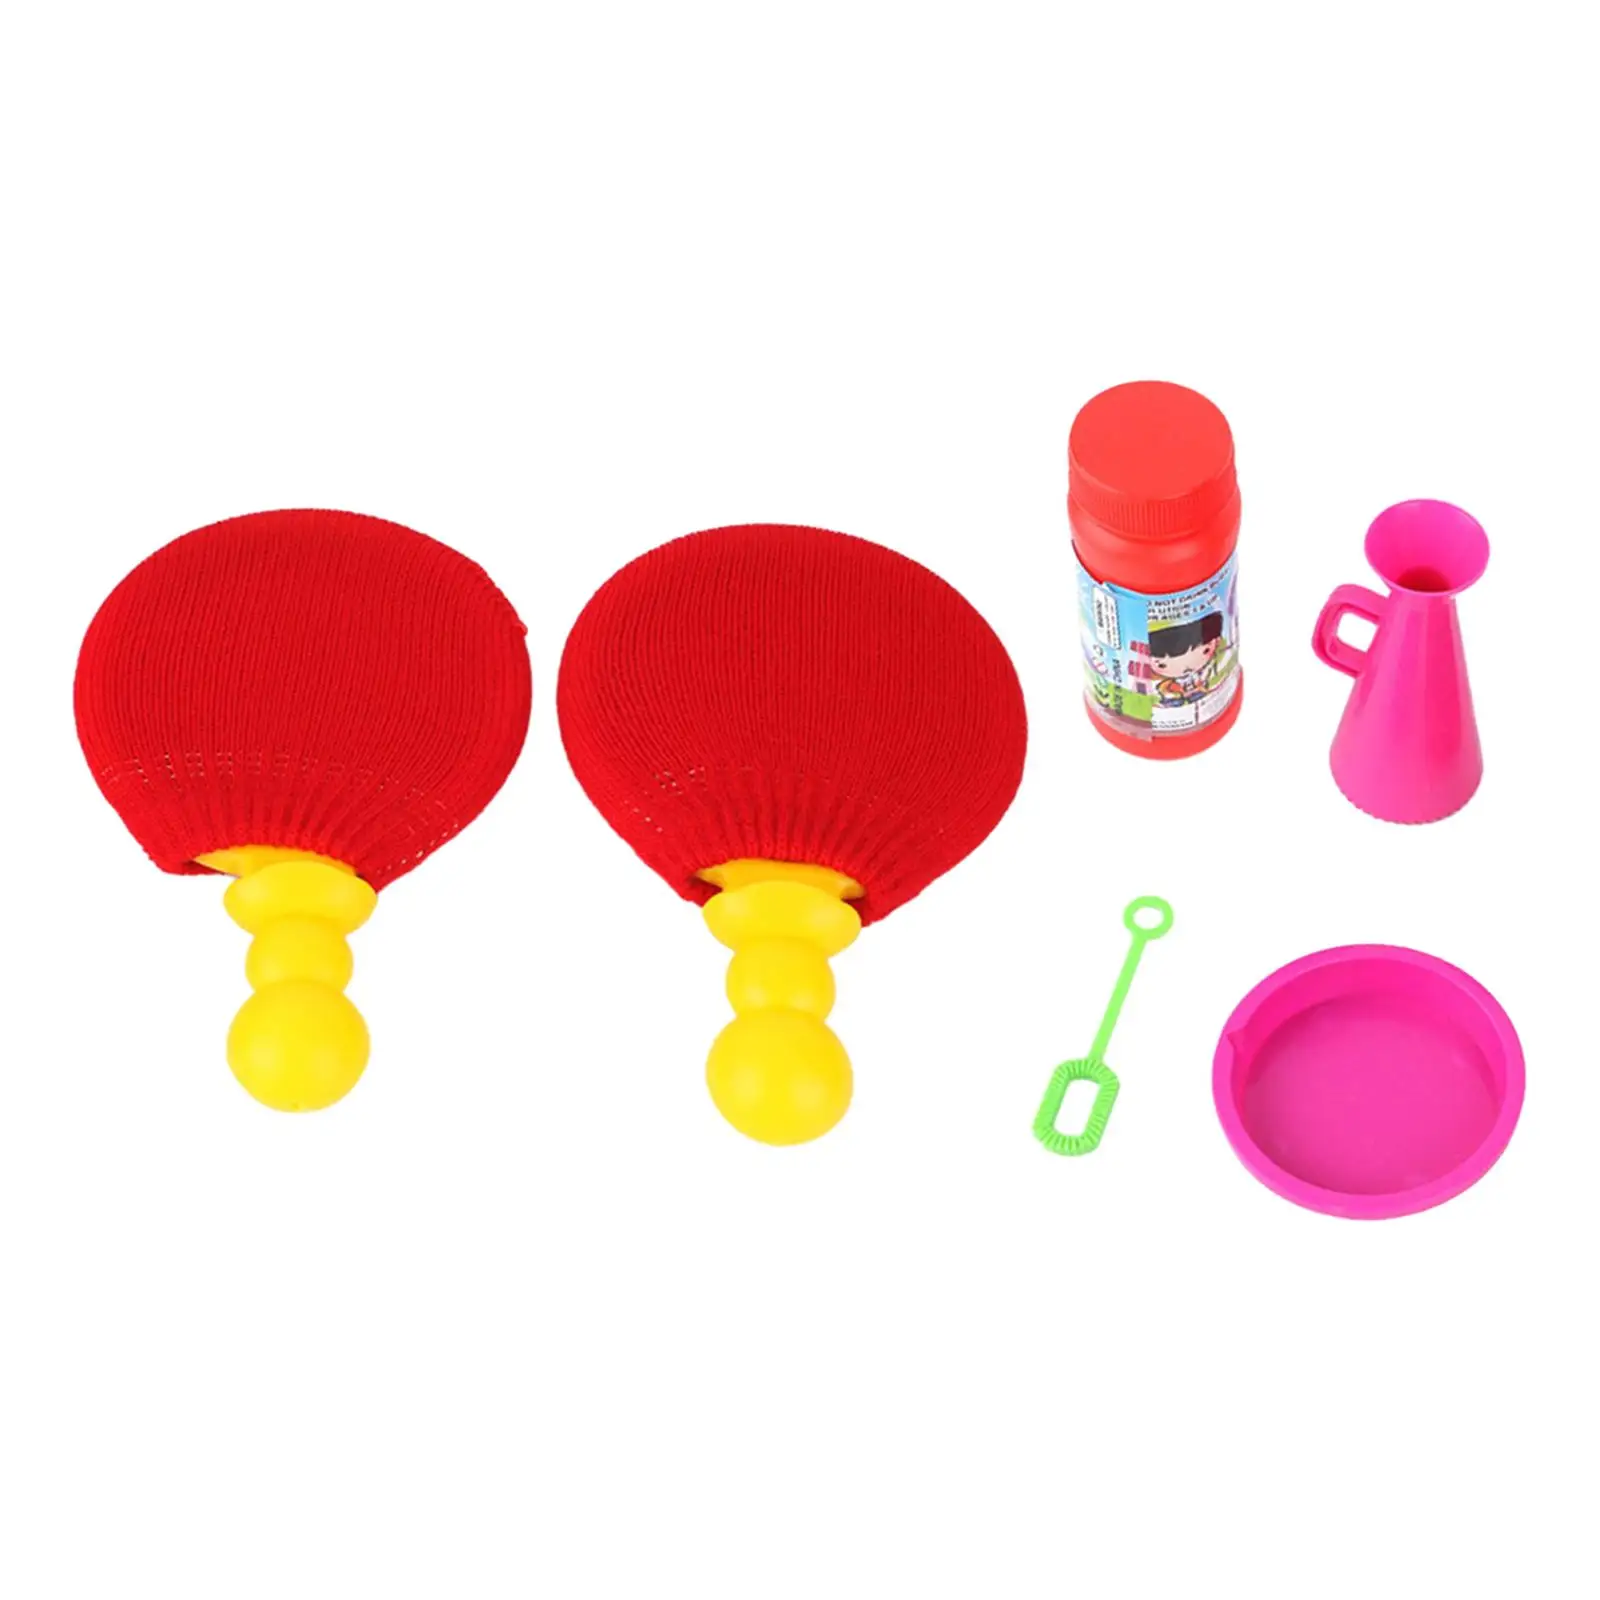 Big Bubble Maker Game Indoor and Play Ping Pong Game with Soap Bubble for Children Kids Girls Boys Party Favors